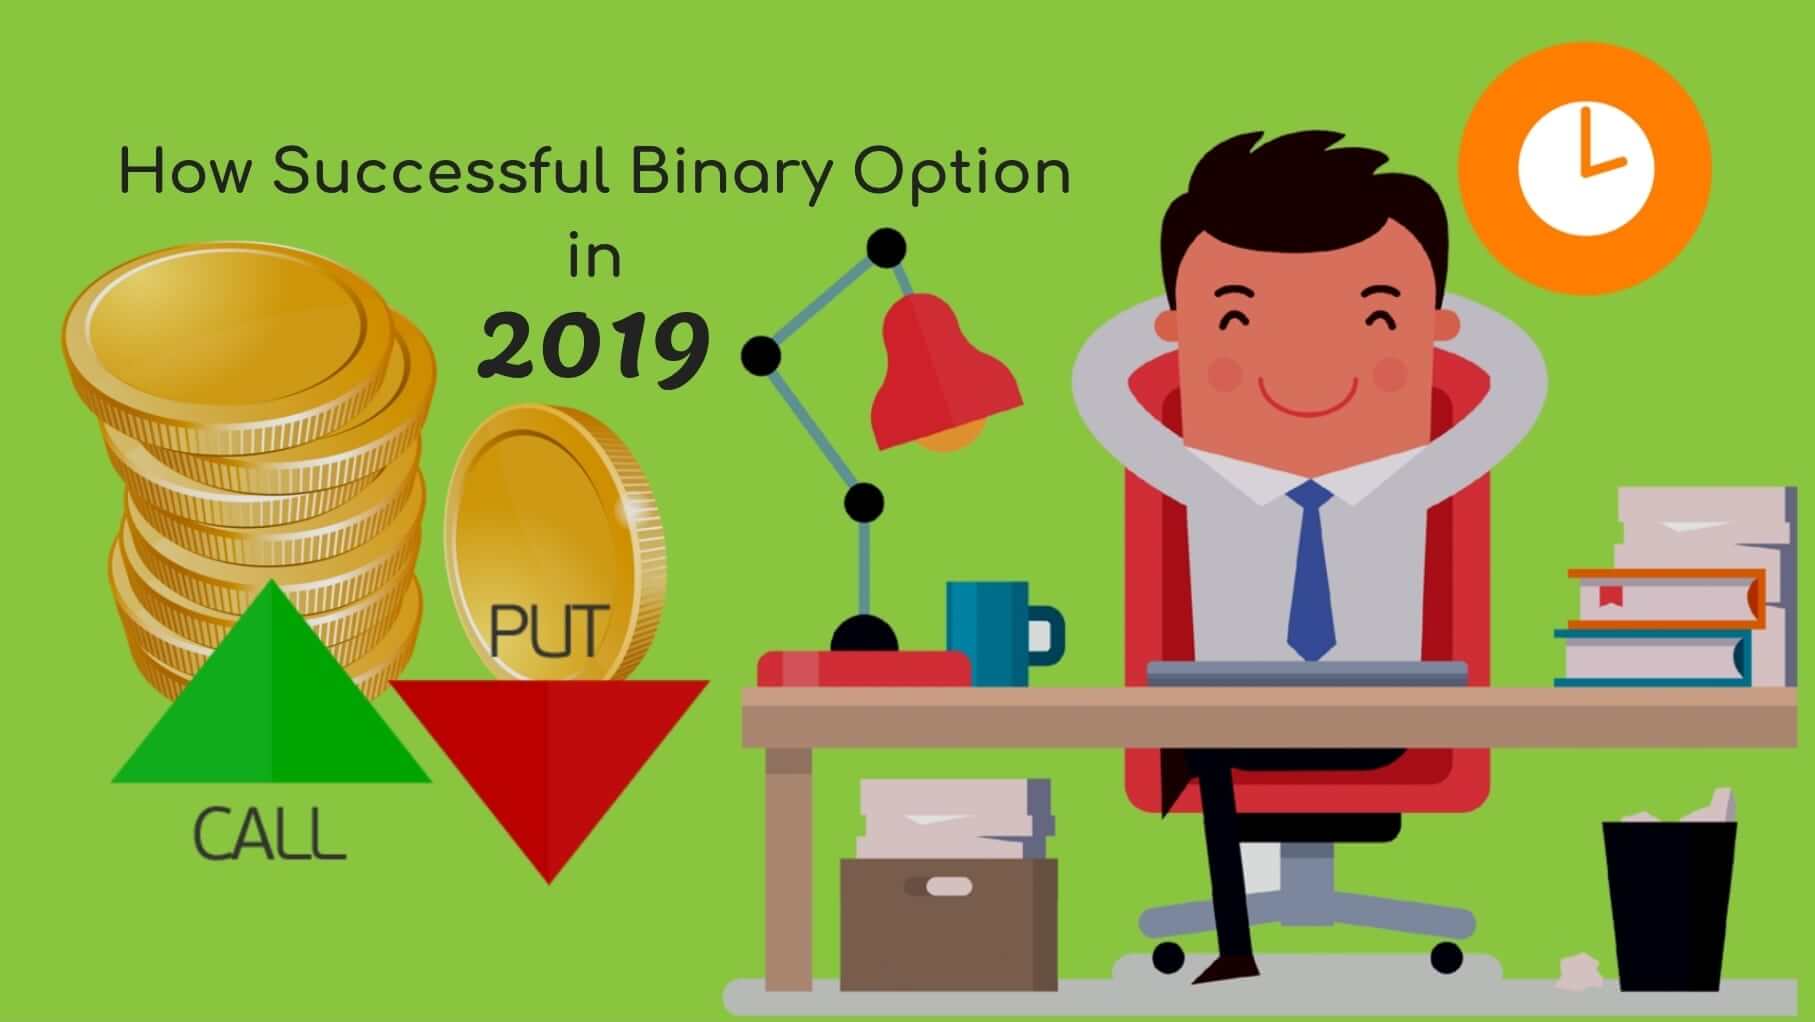 How to succeed in binary options trading